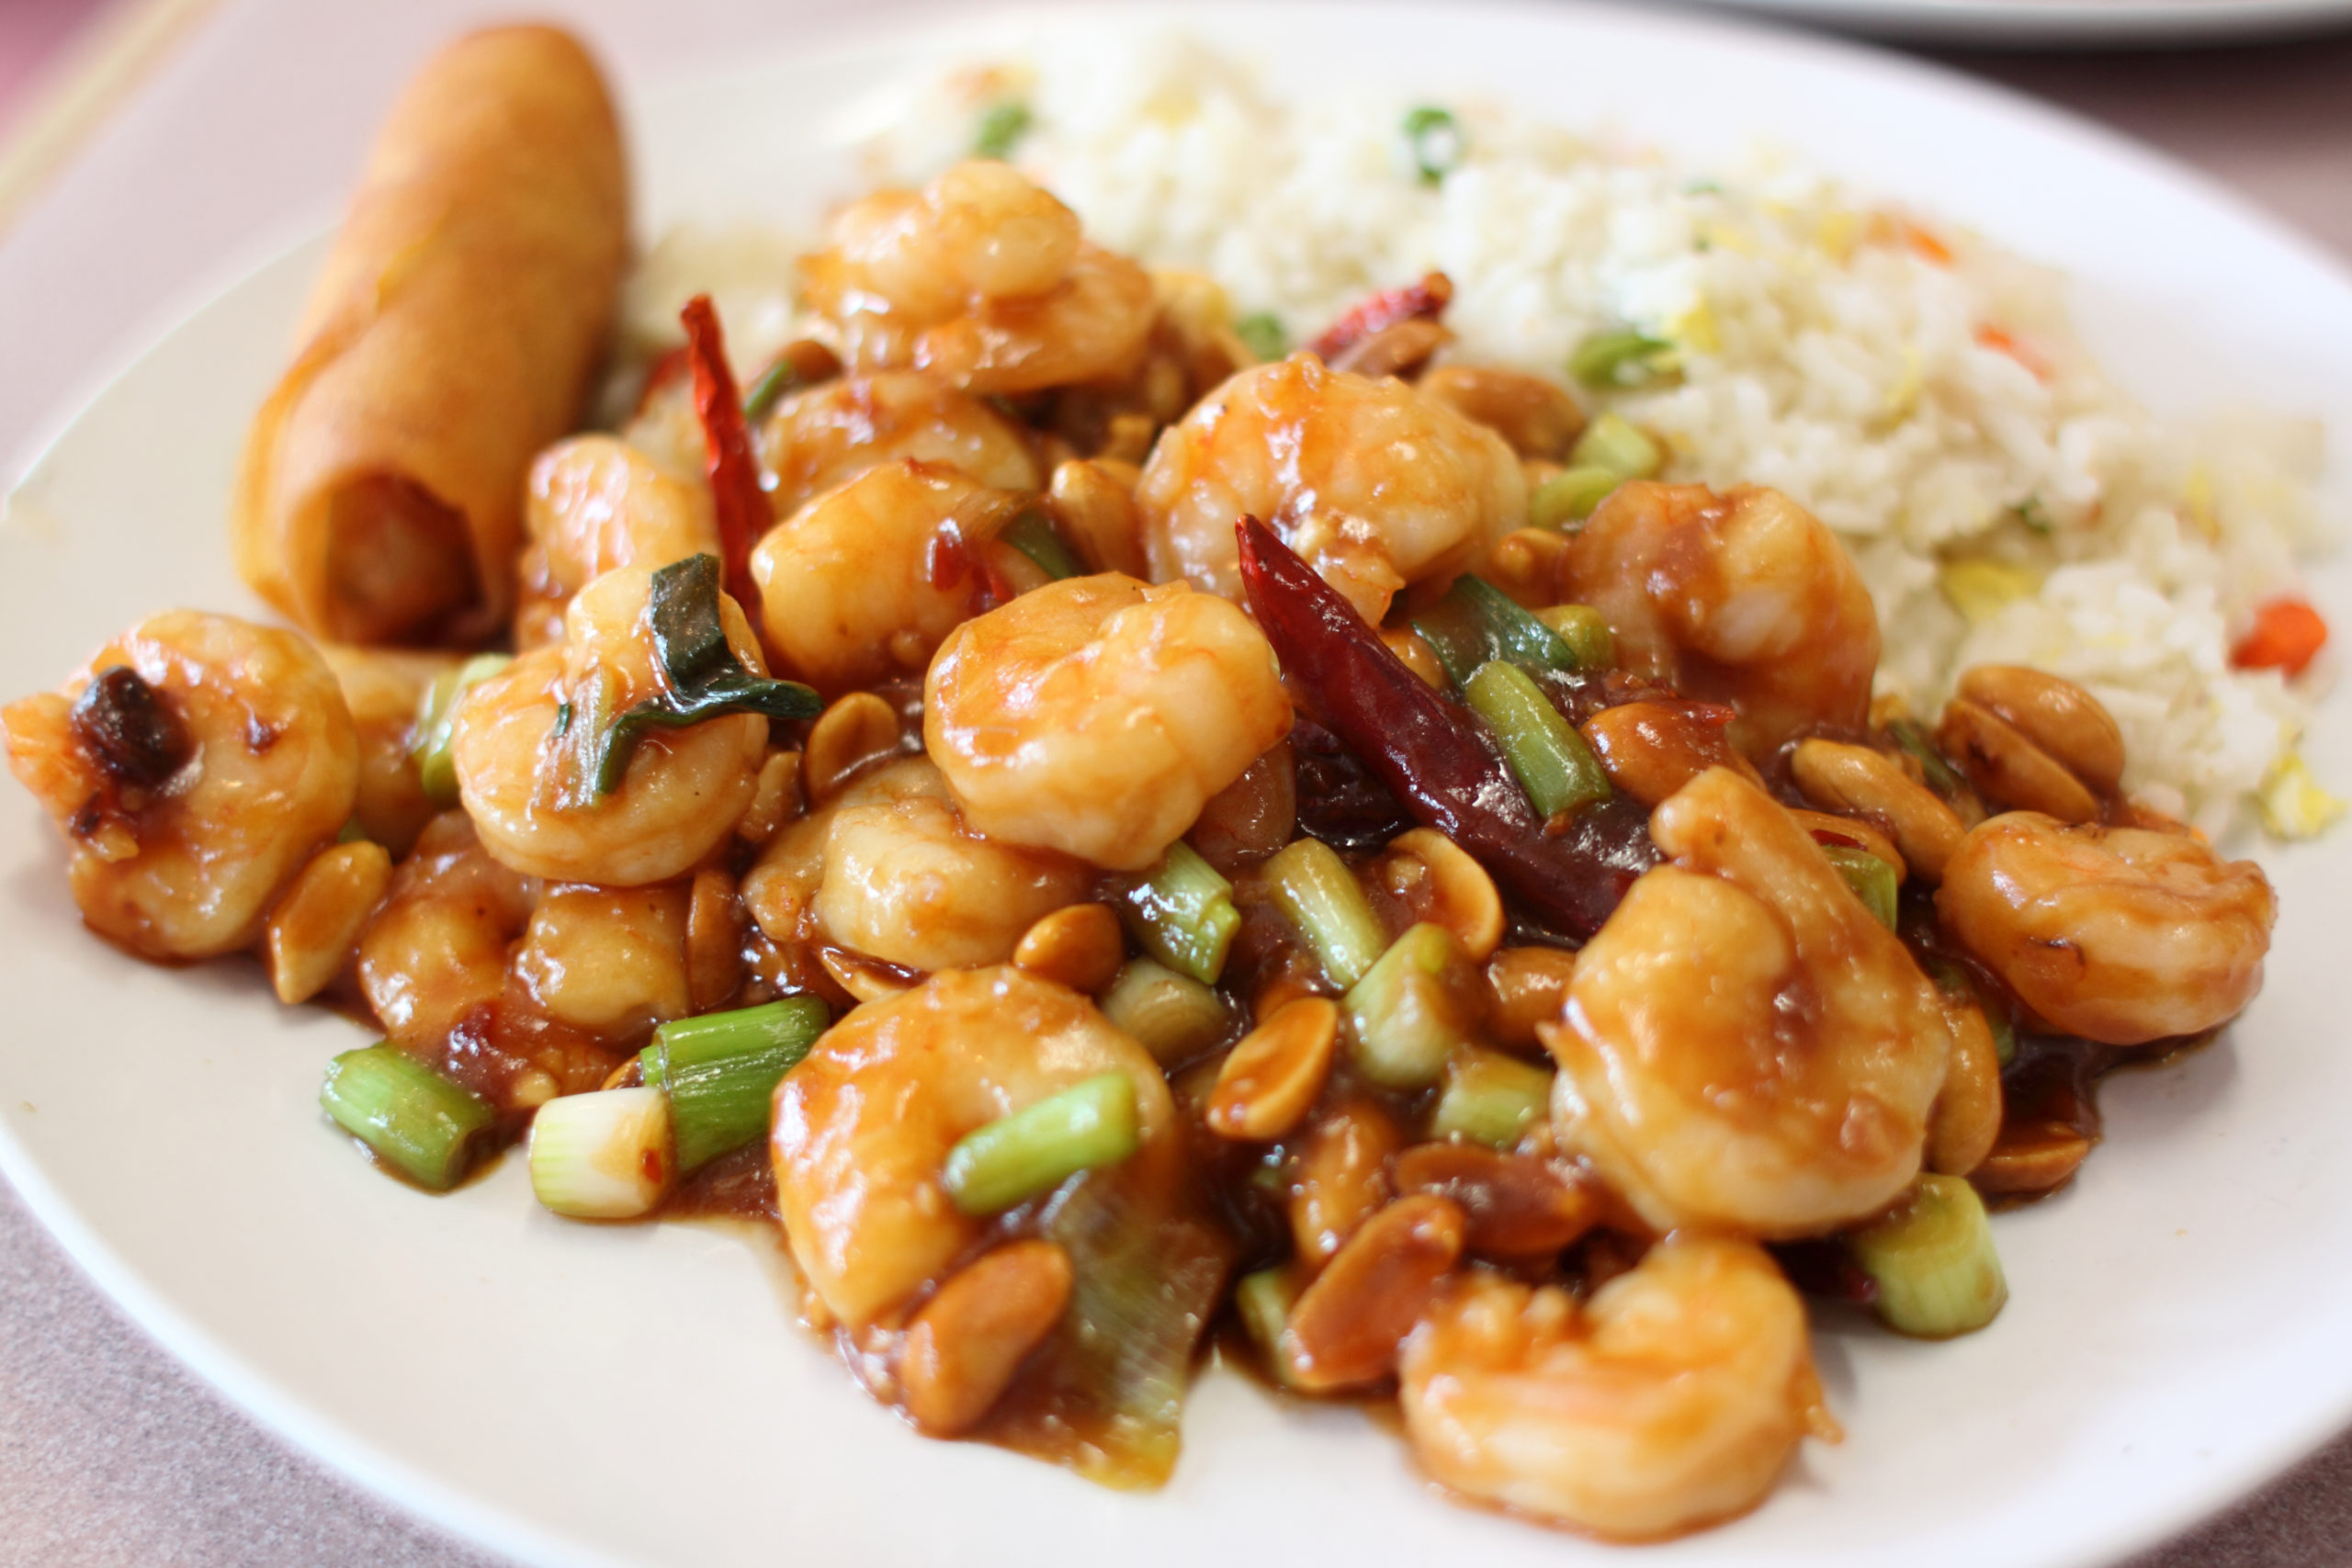 Plate of kung pao shrimp